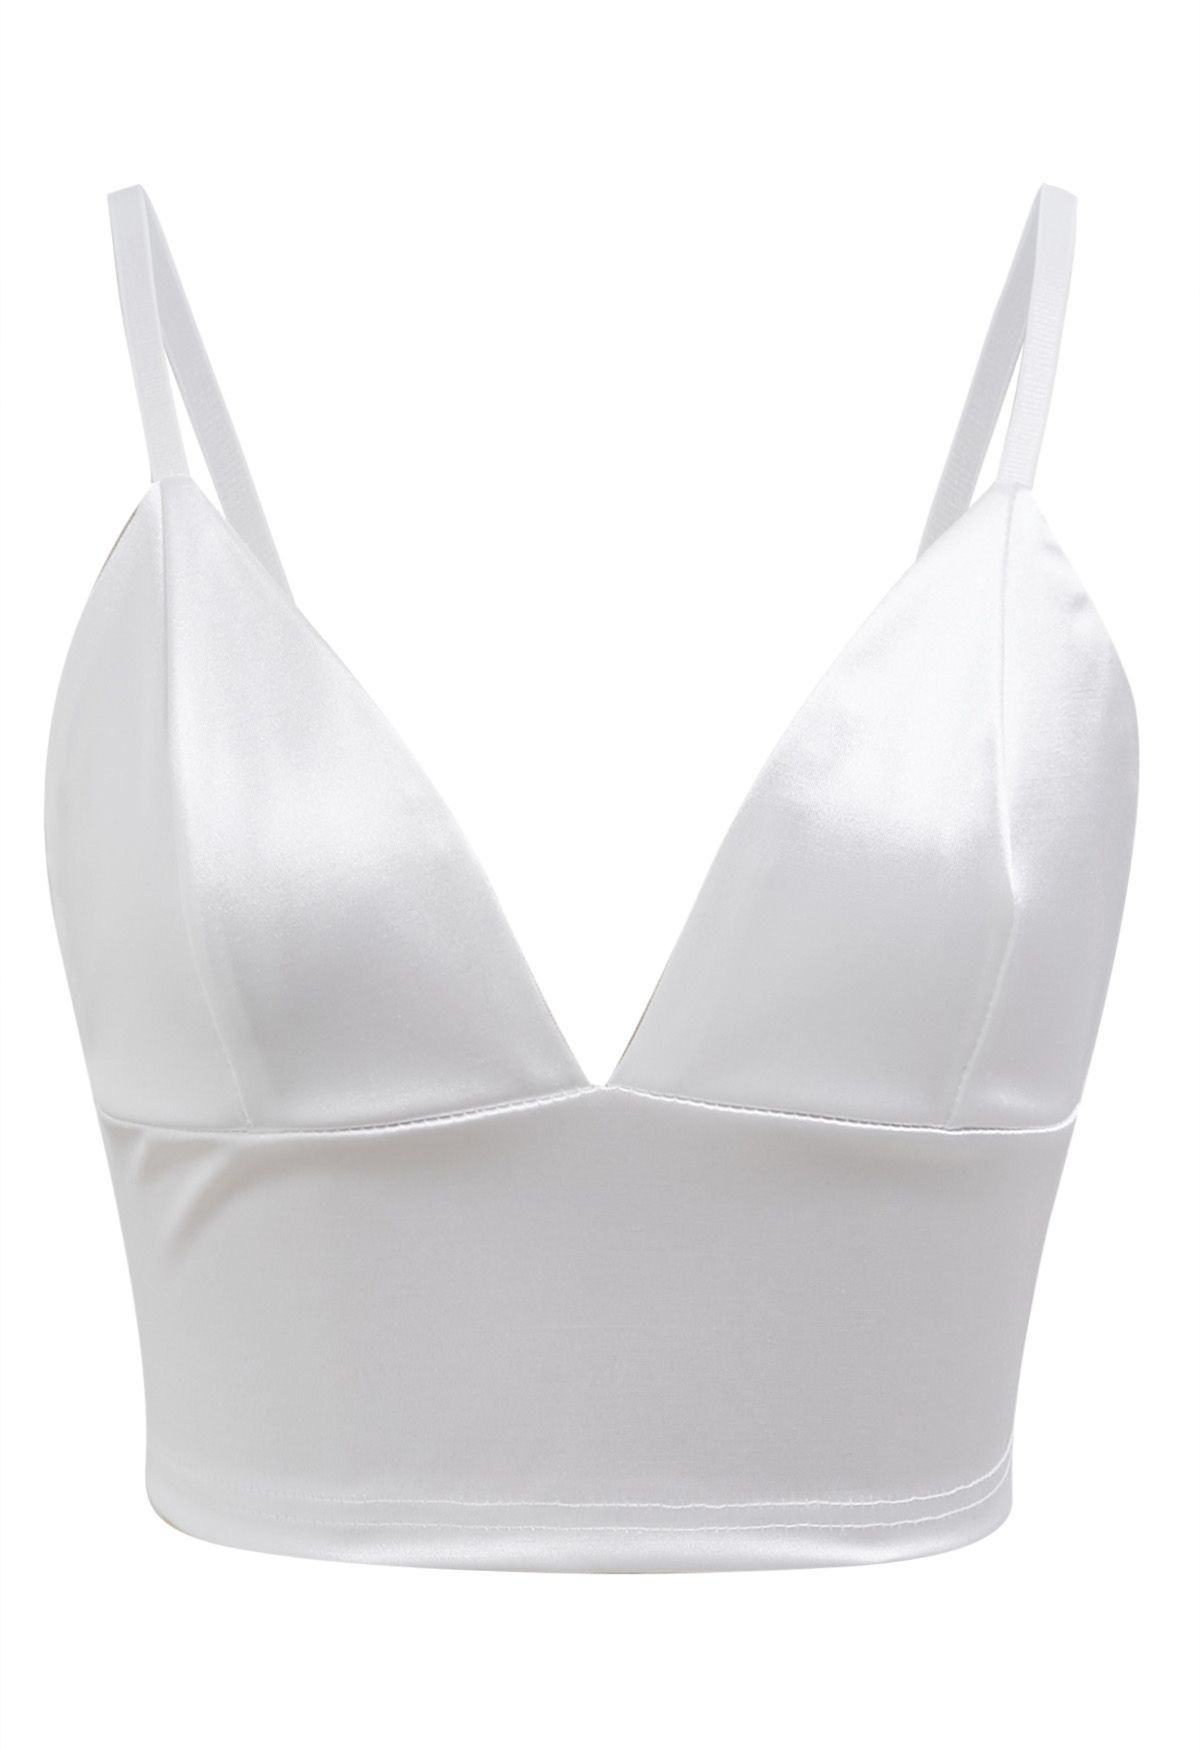 Satin Finish V-Neck Crop Cami Top in White | Chicwish